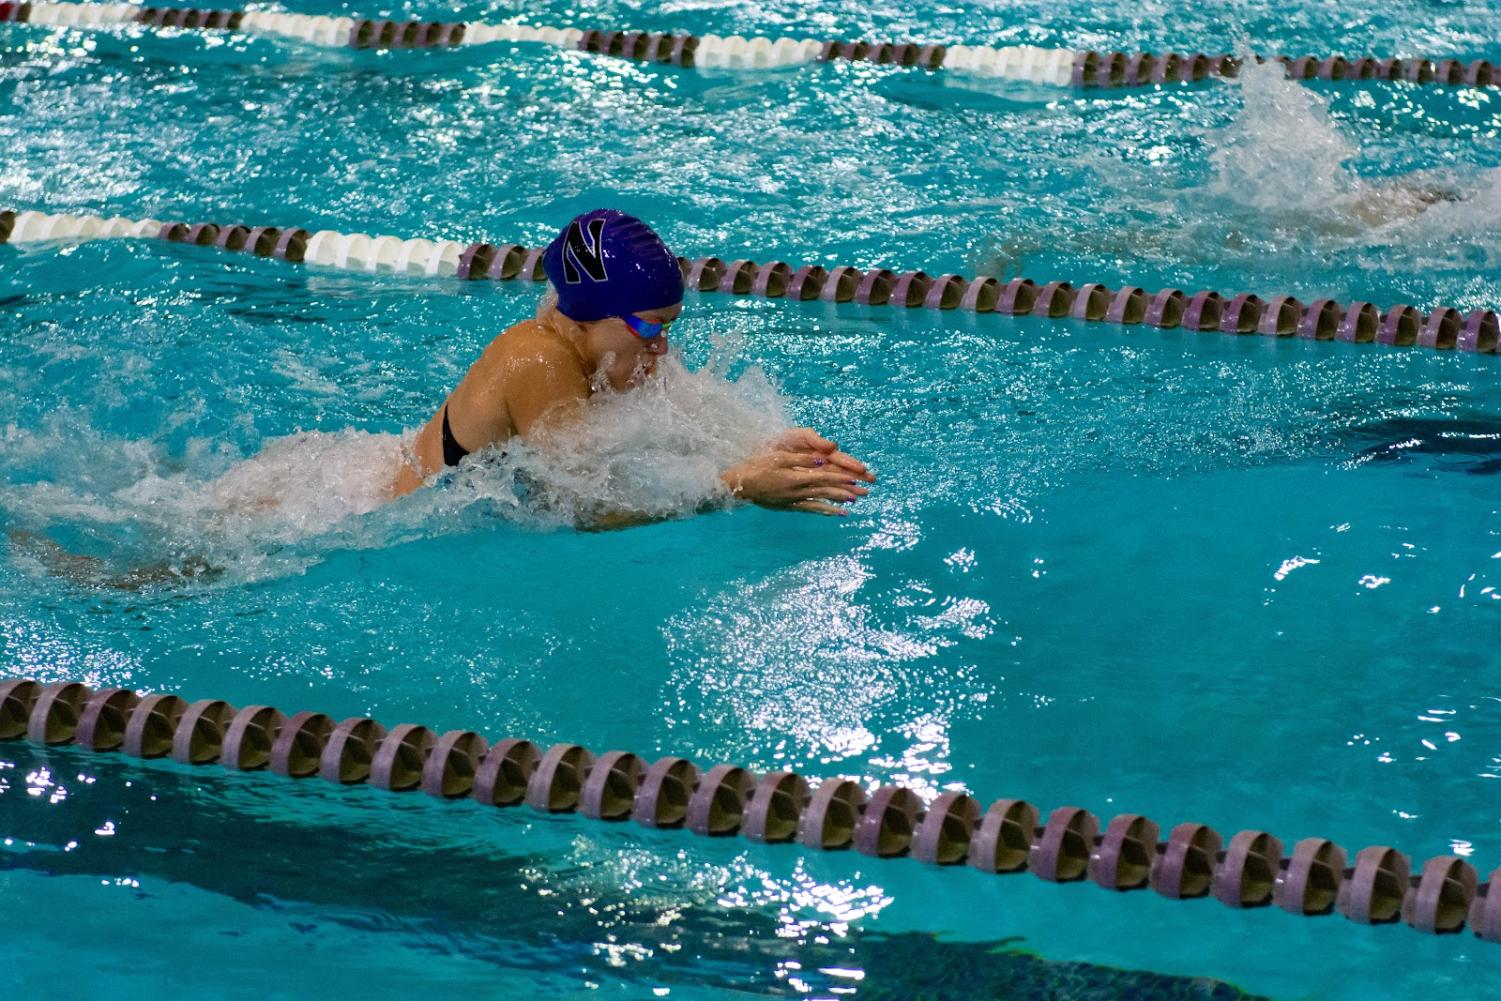 A swimmer wearing a purple swim cap takes a breath above the water during the race. 